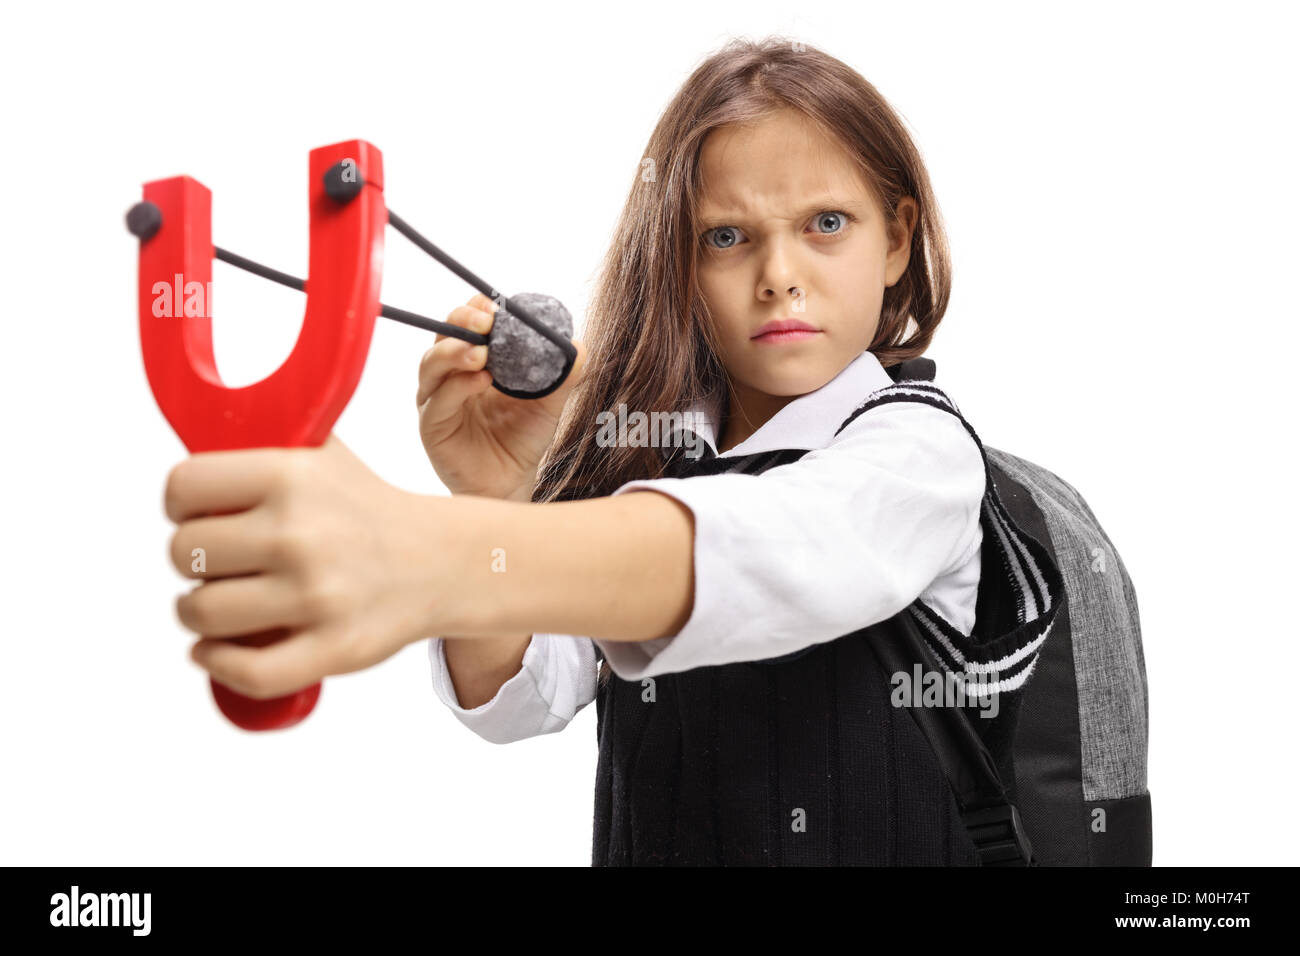 Angry little schoolgirl aiming with a stone and a slingshot isolated on white background Stock Photo